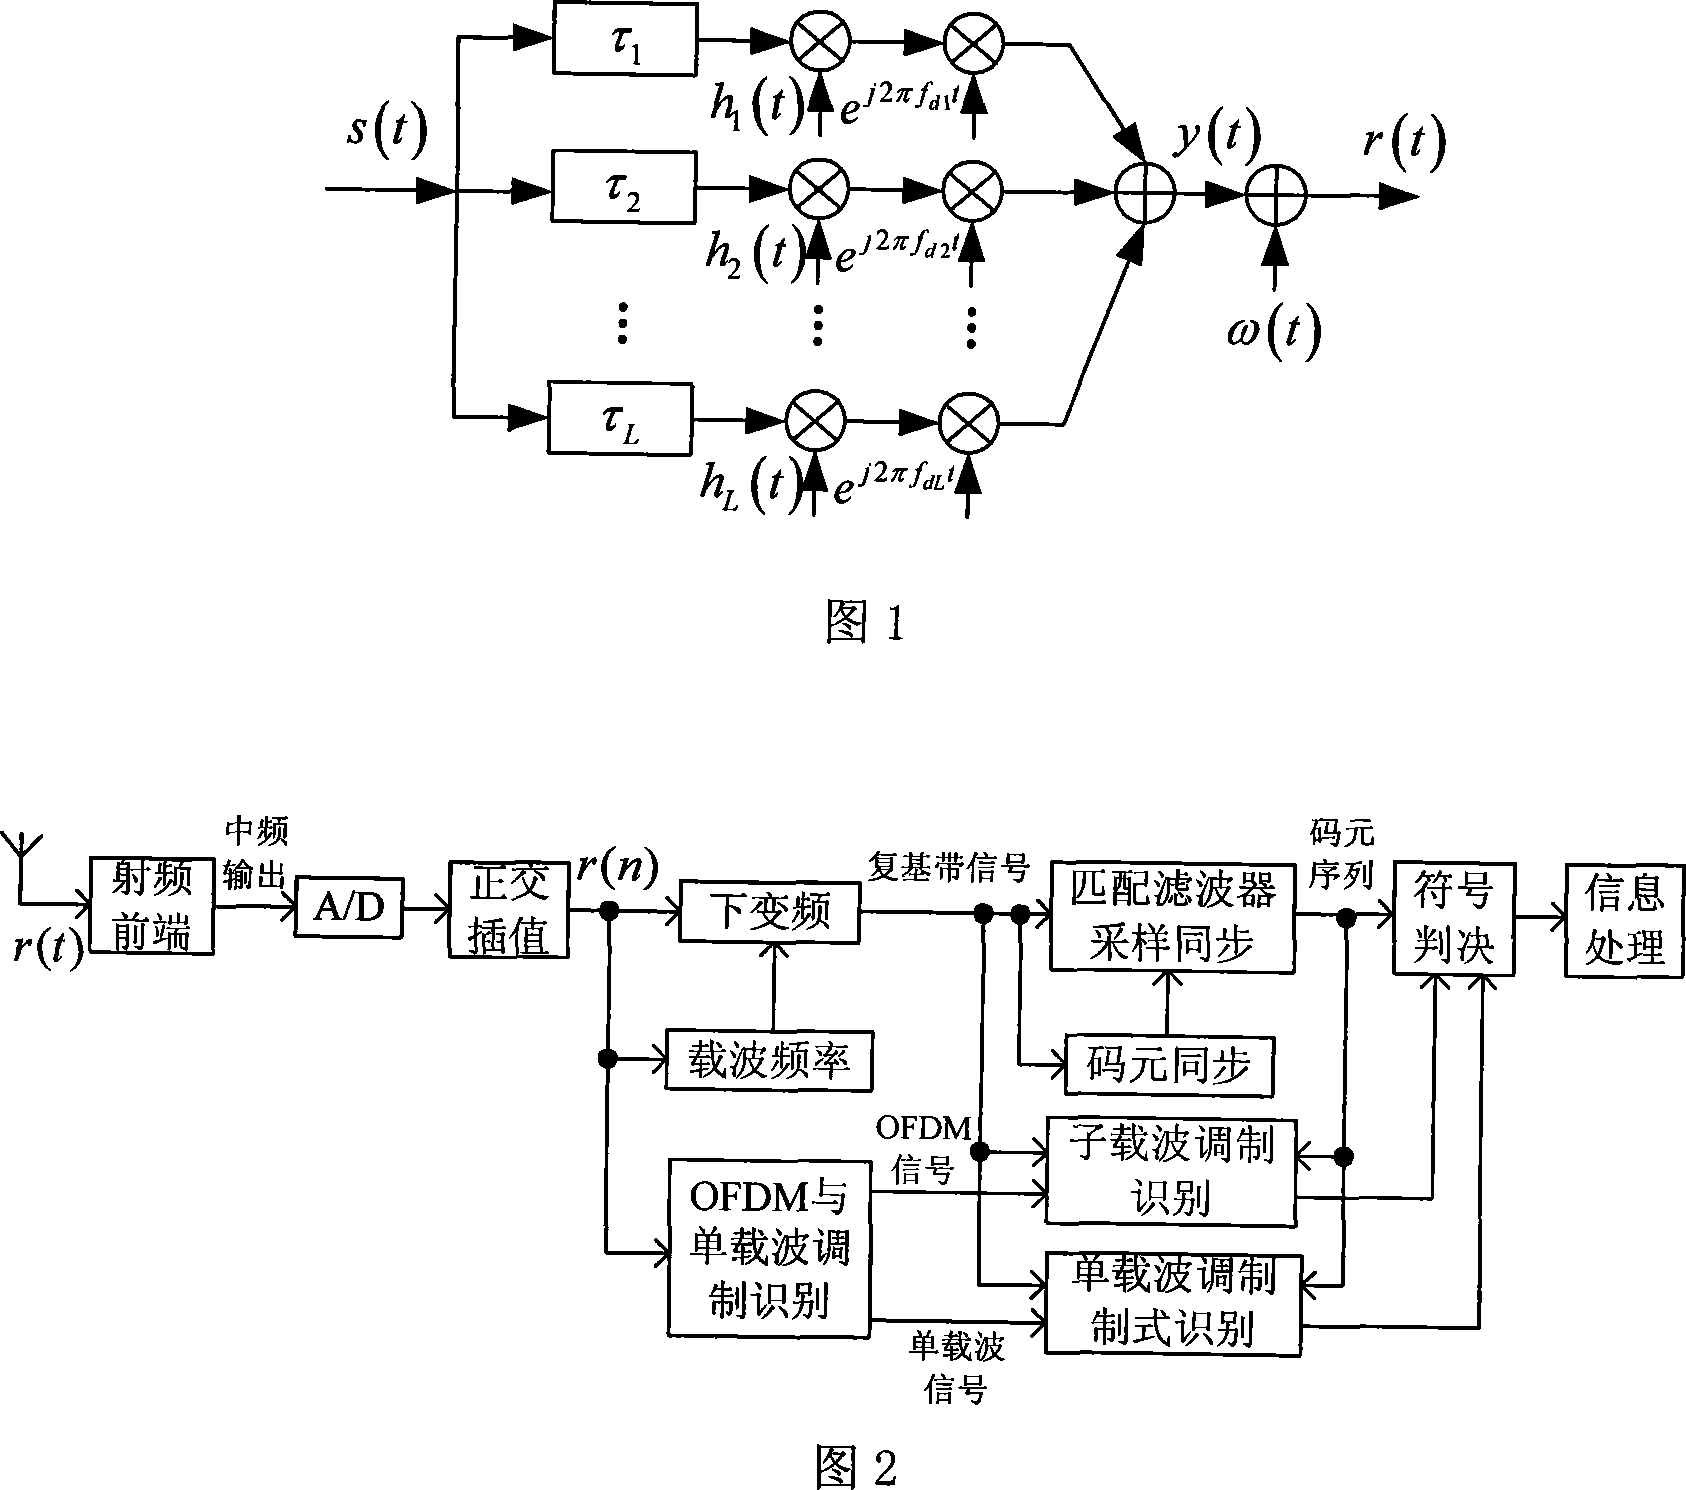 Method for identifying OFDM modulation system of multi-path Rayleigh fast fading channel